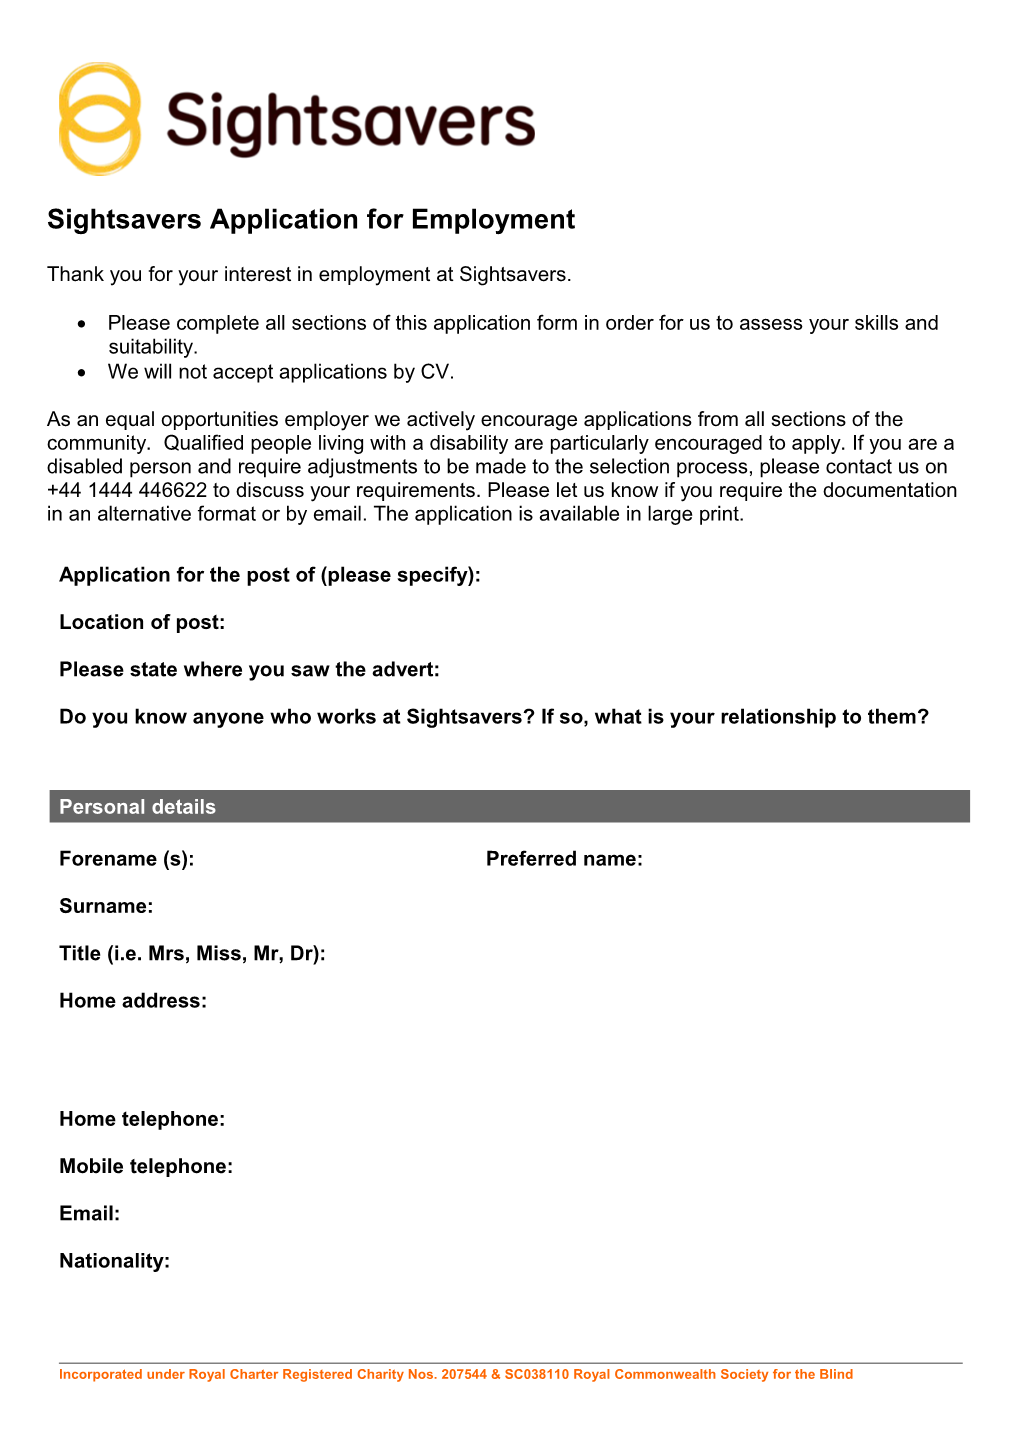 Sightsavers Application for Employment